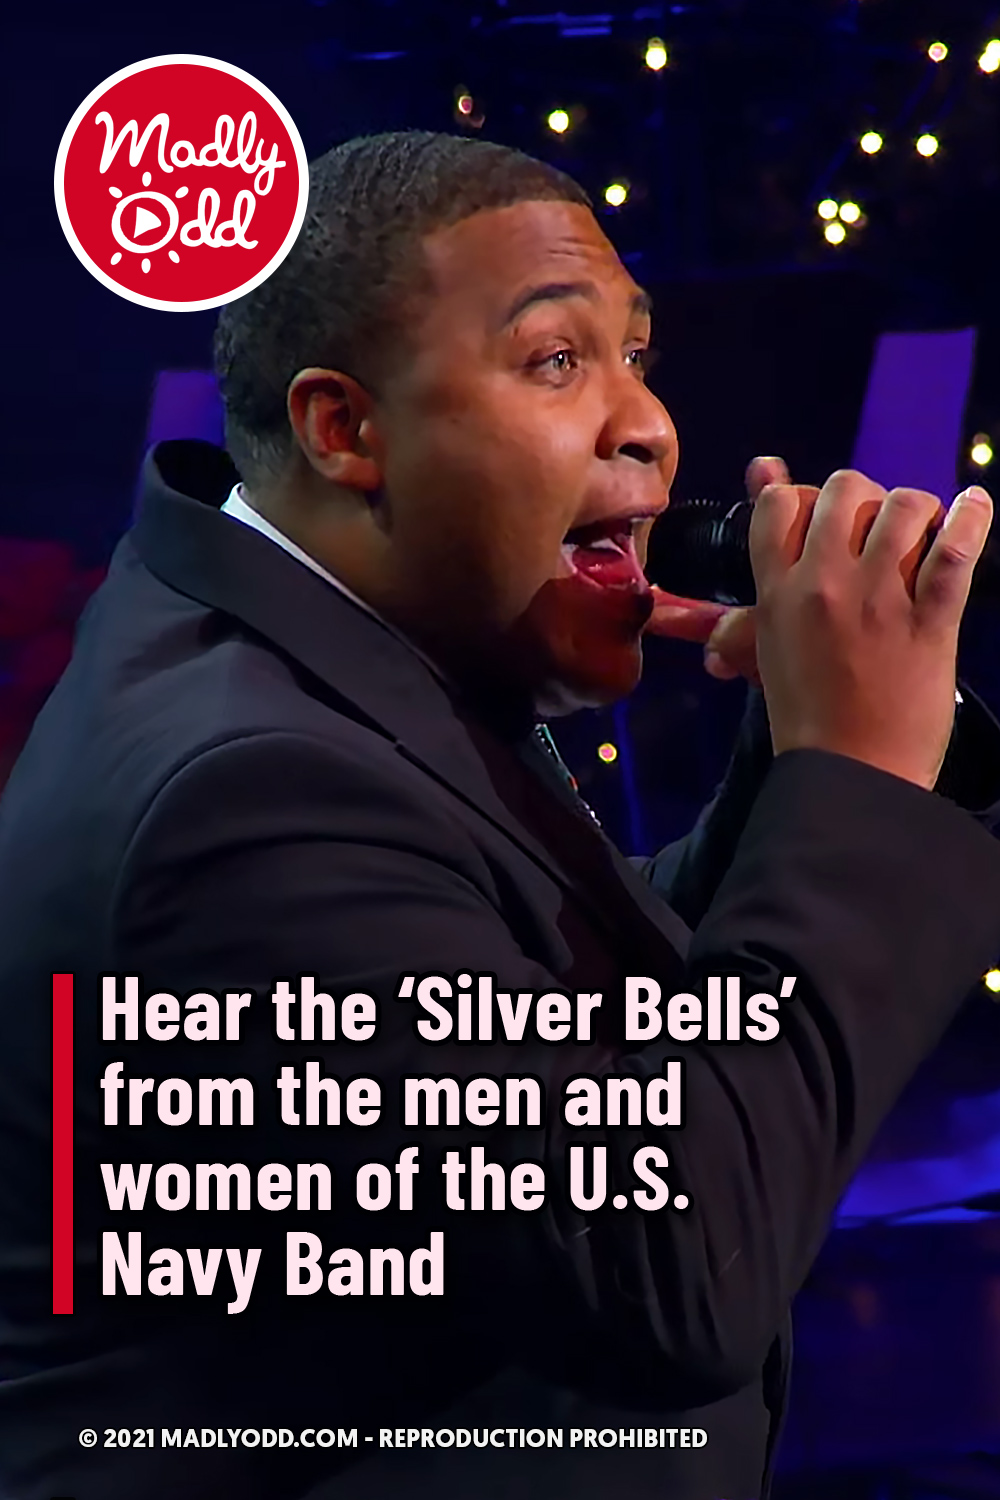 Hear the ‘Silver Bells’ from the men and women of the U.S. Navy Band